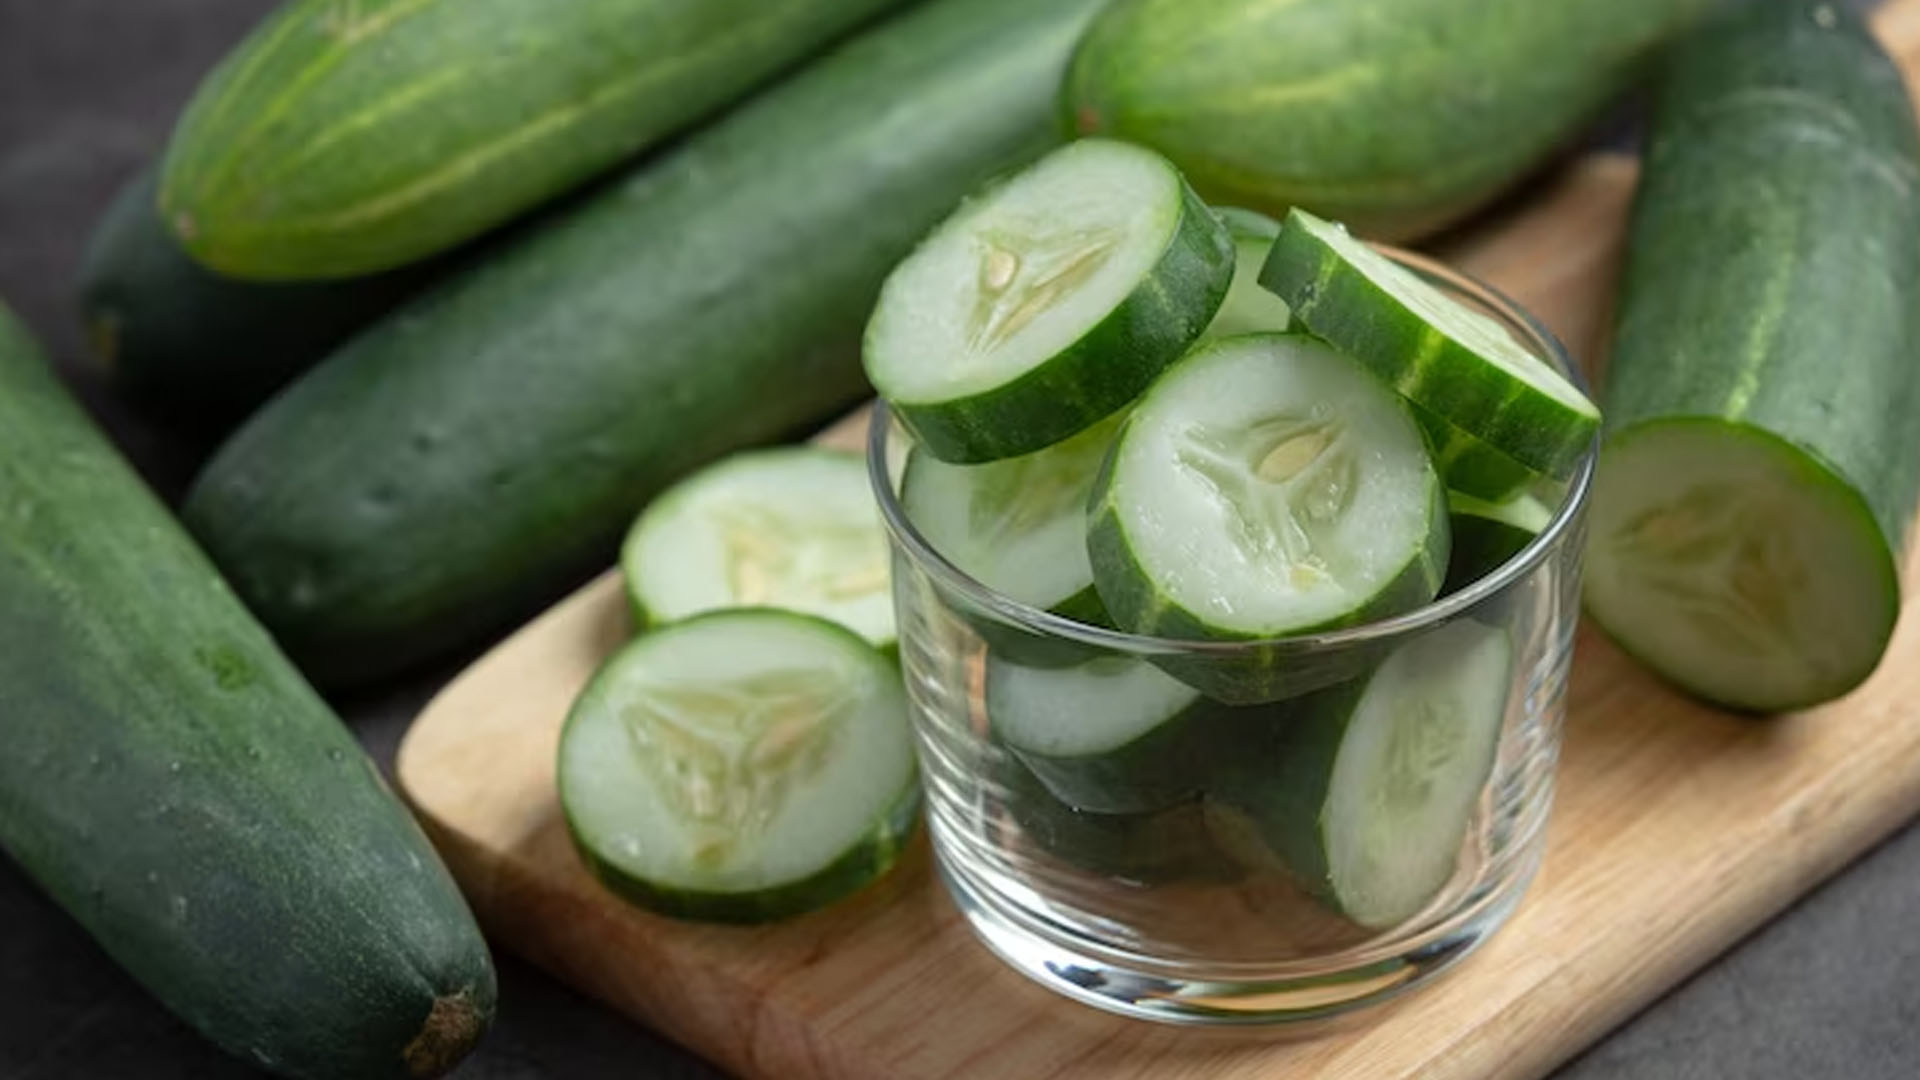 How To Use Cucumber For Health Benefits?